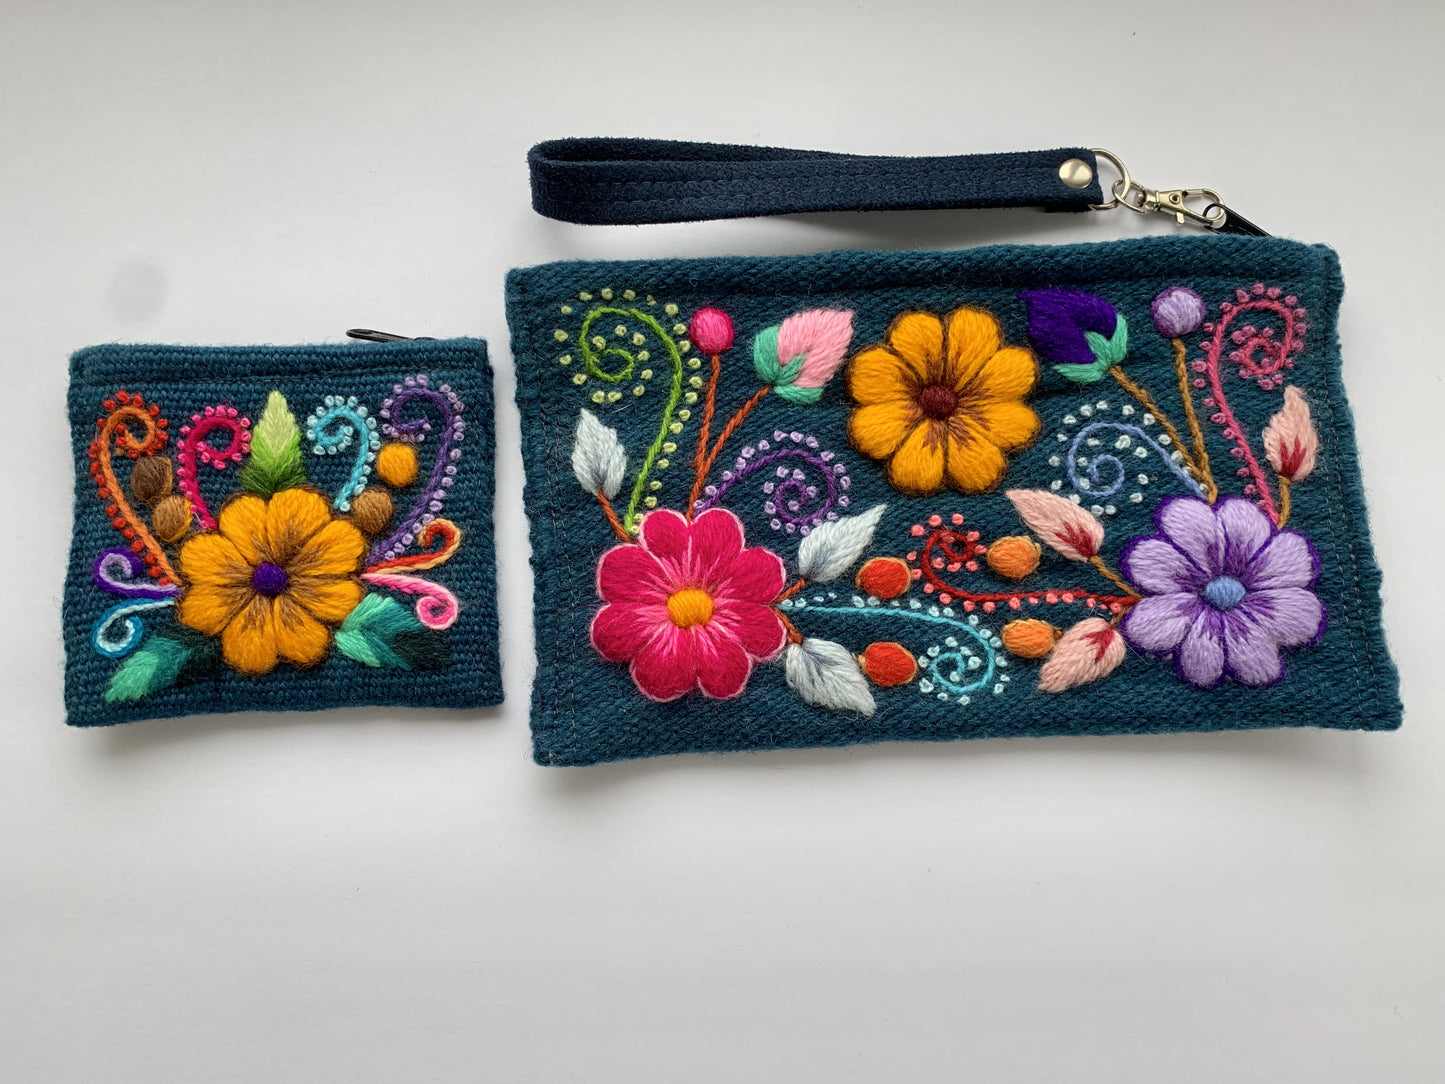 Embroidered wallet and coin pouch Carmen